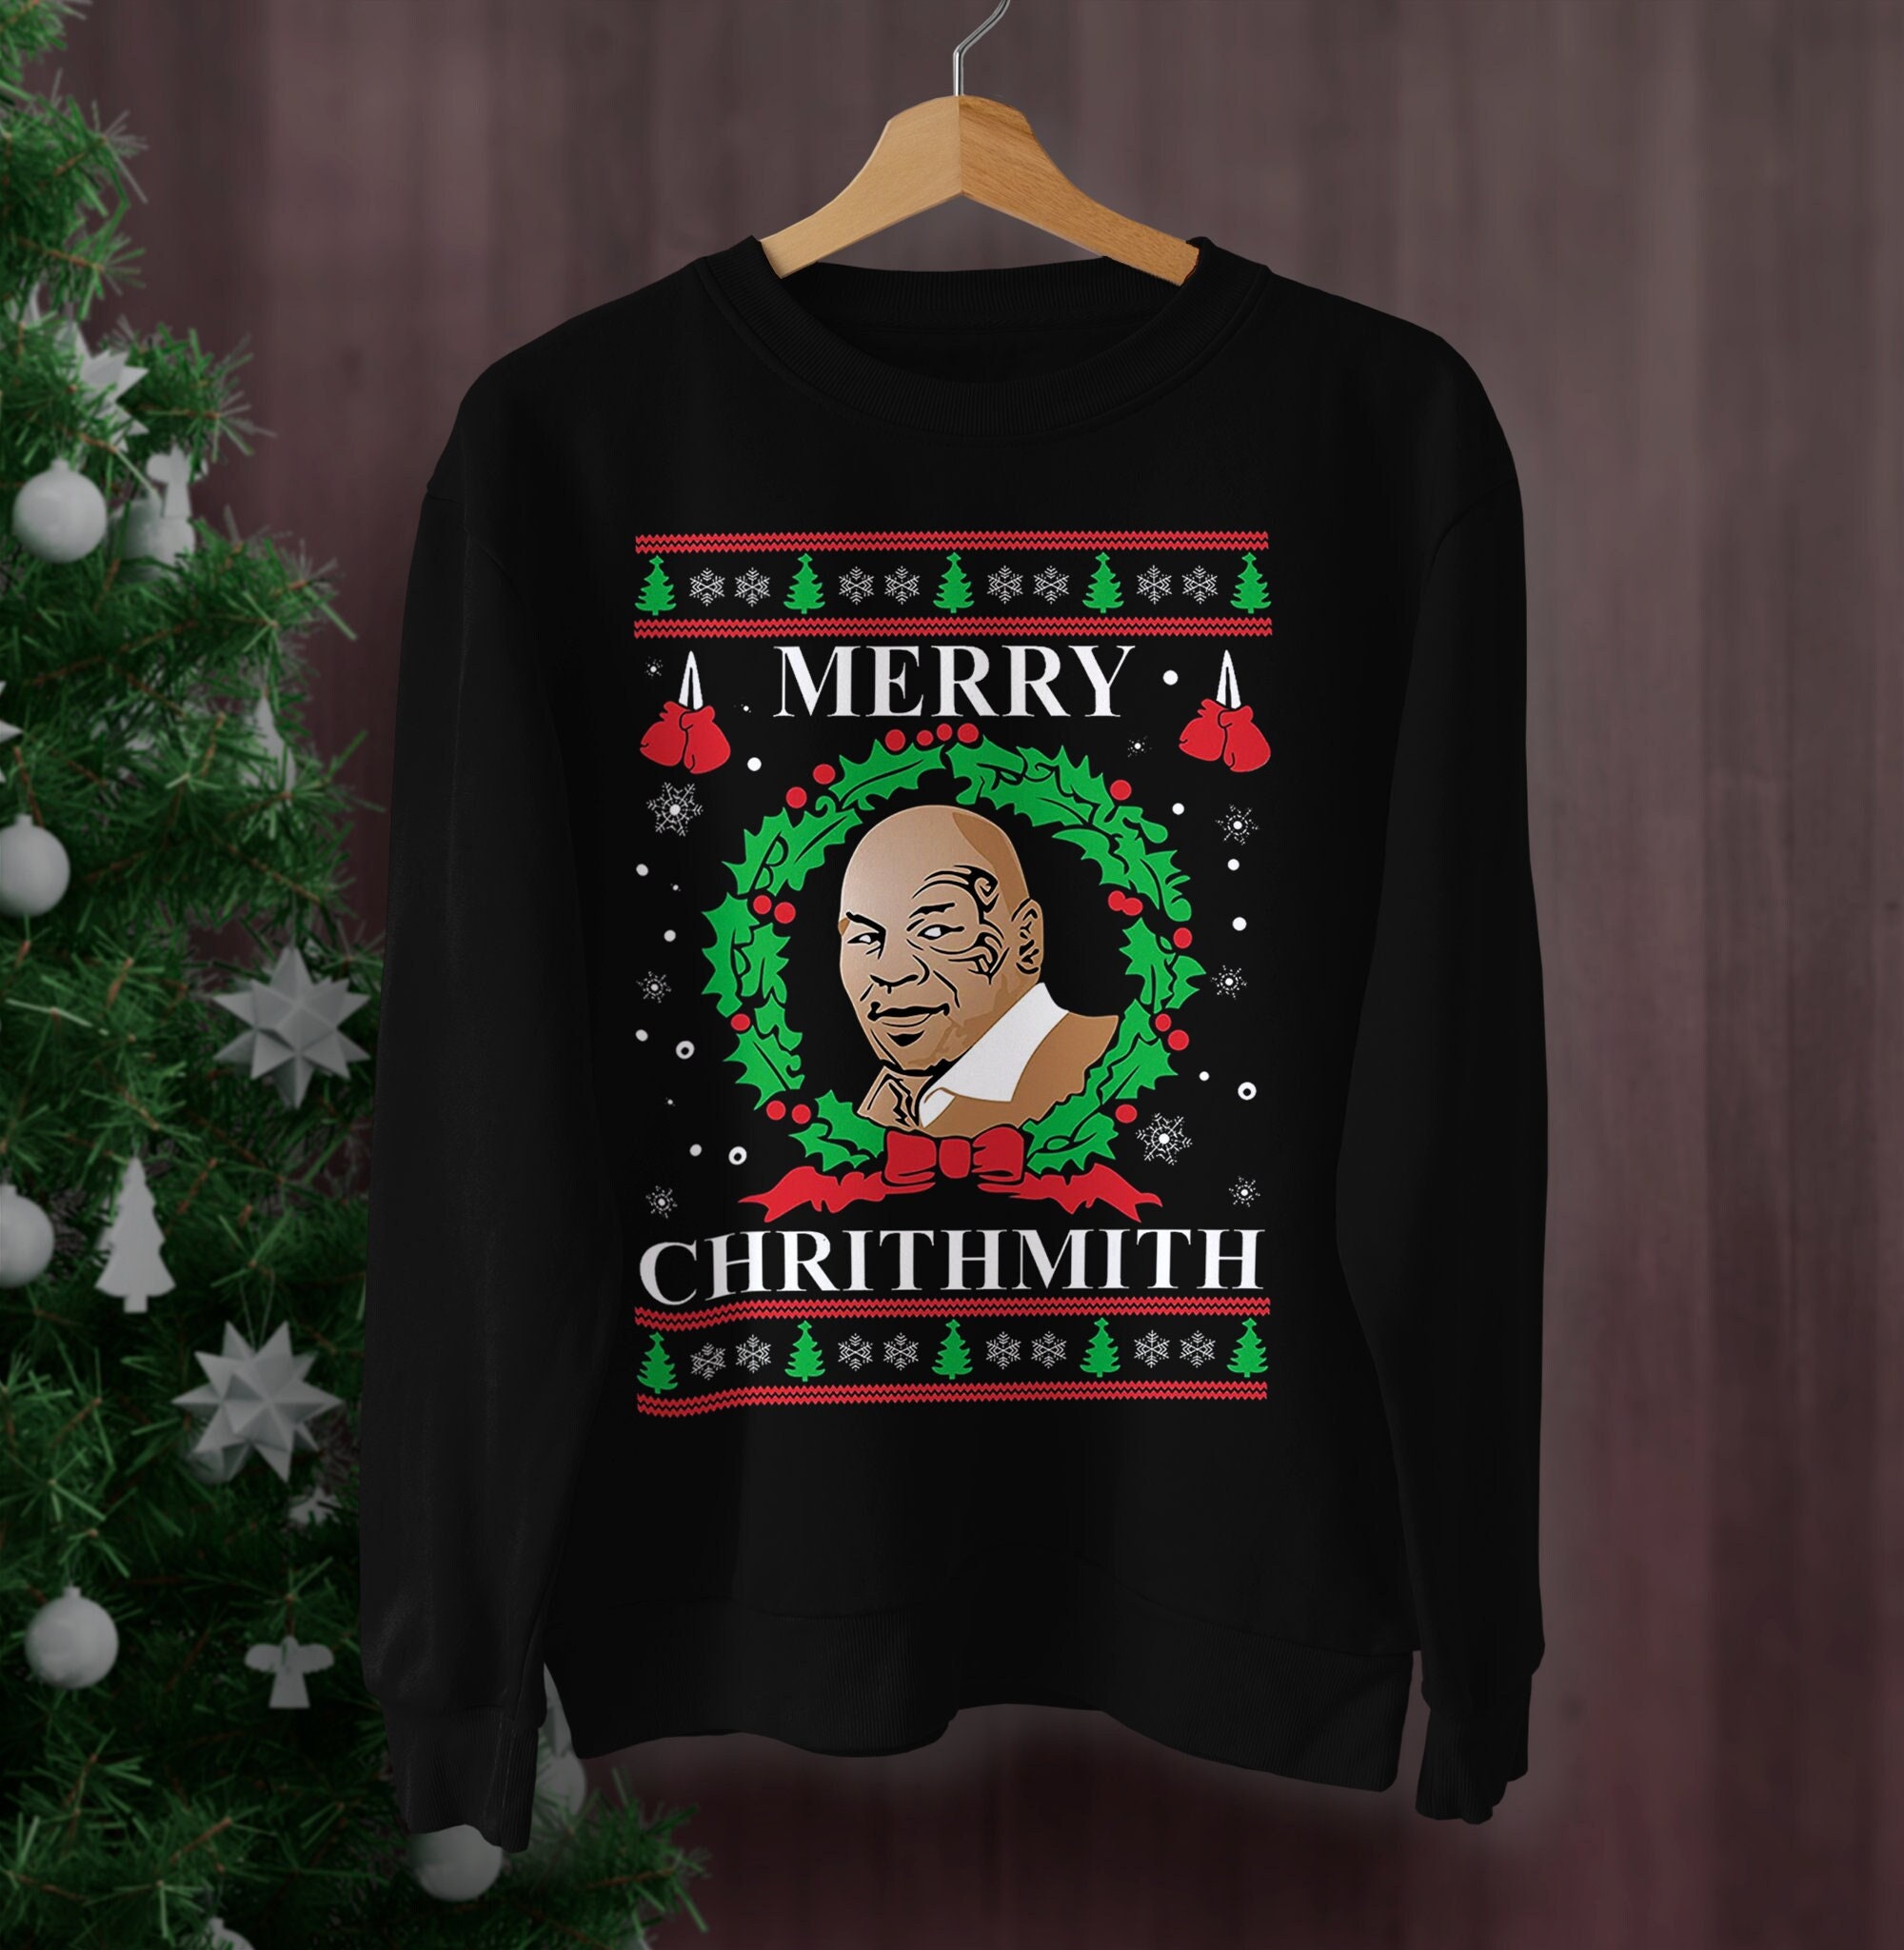 Mike T Christmas Sweatshirt Ugly Christmas Sweater Mike Tyson Merry Chrithmith Unisex Hoodie Ugly Christmas Shirt Ugly Christmas Hoodie Size Up To 5xl